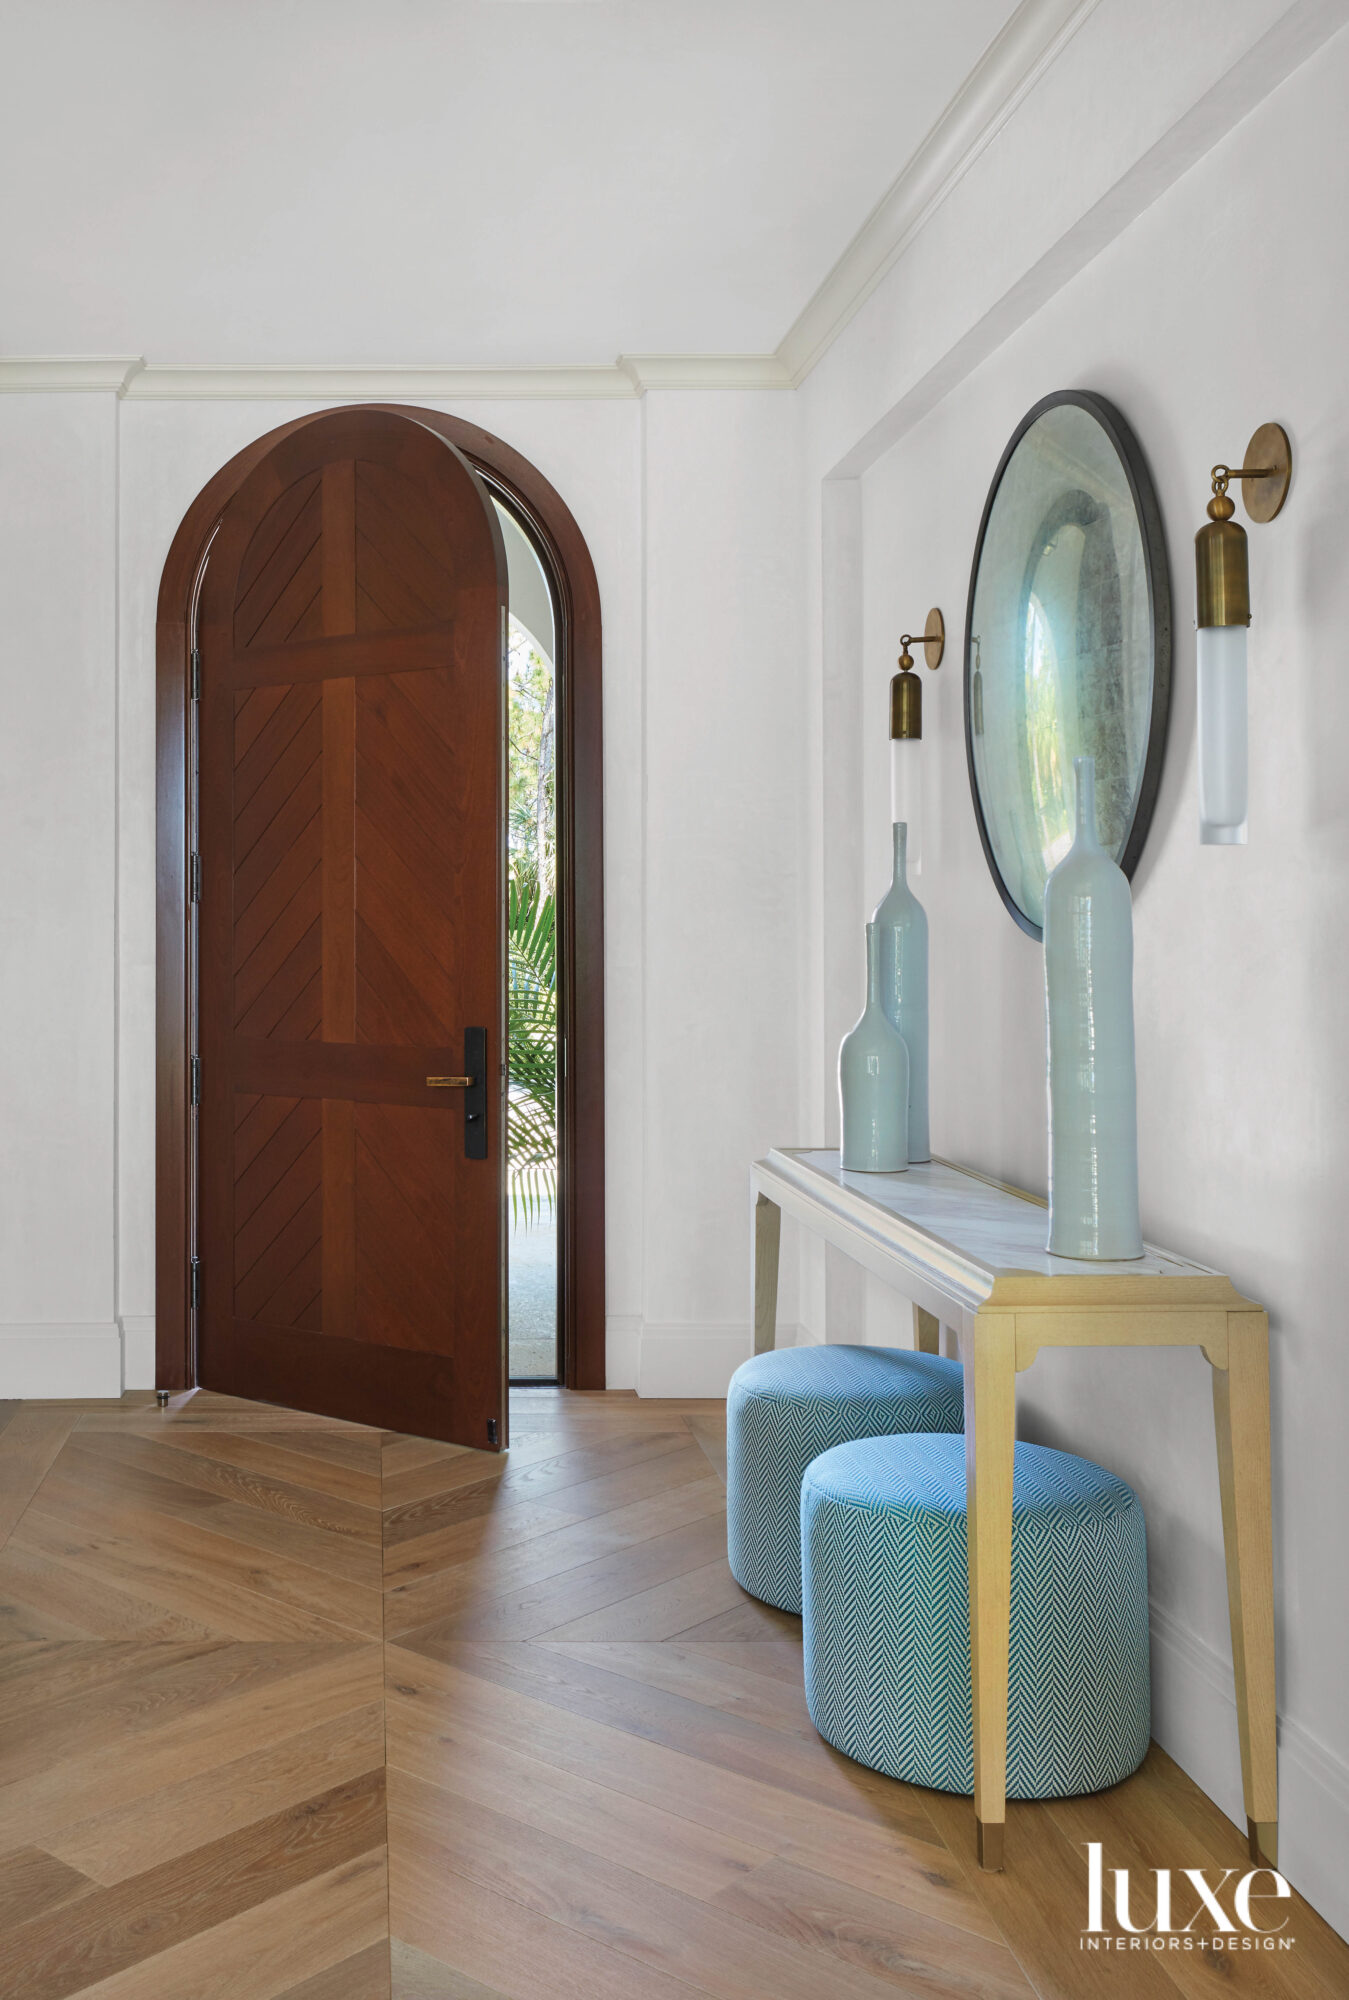 entry with chevron pattern flooring, curved wood door, blue stools, wood console and round mirror